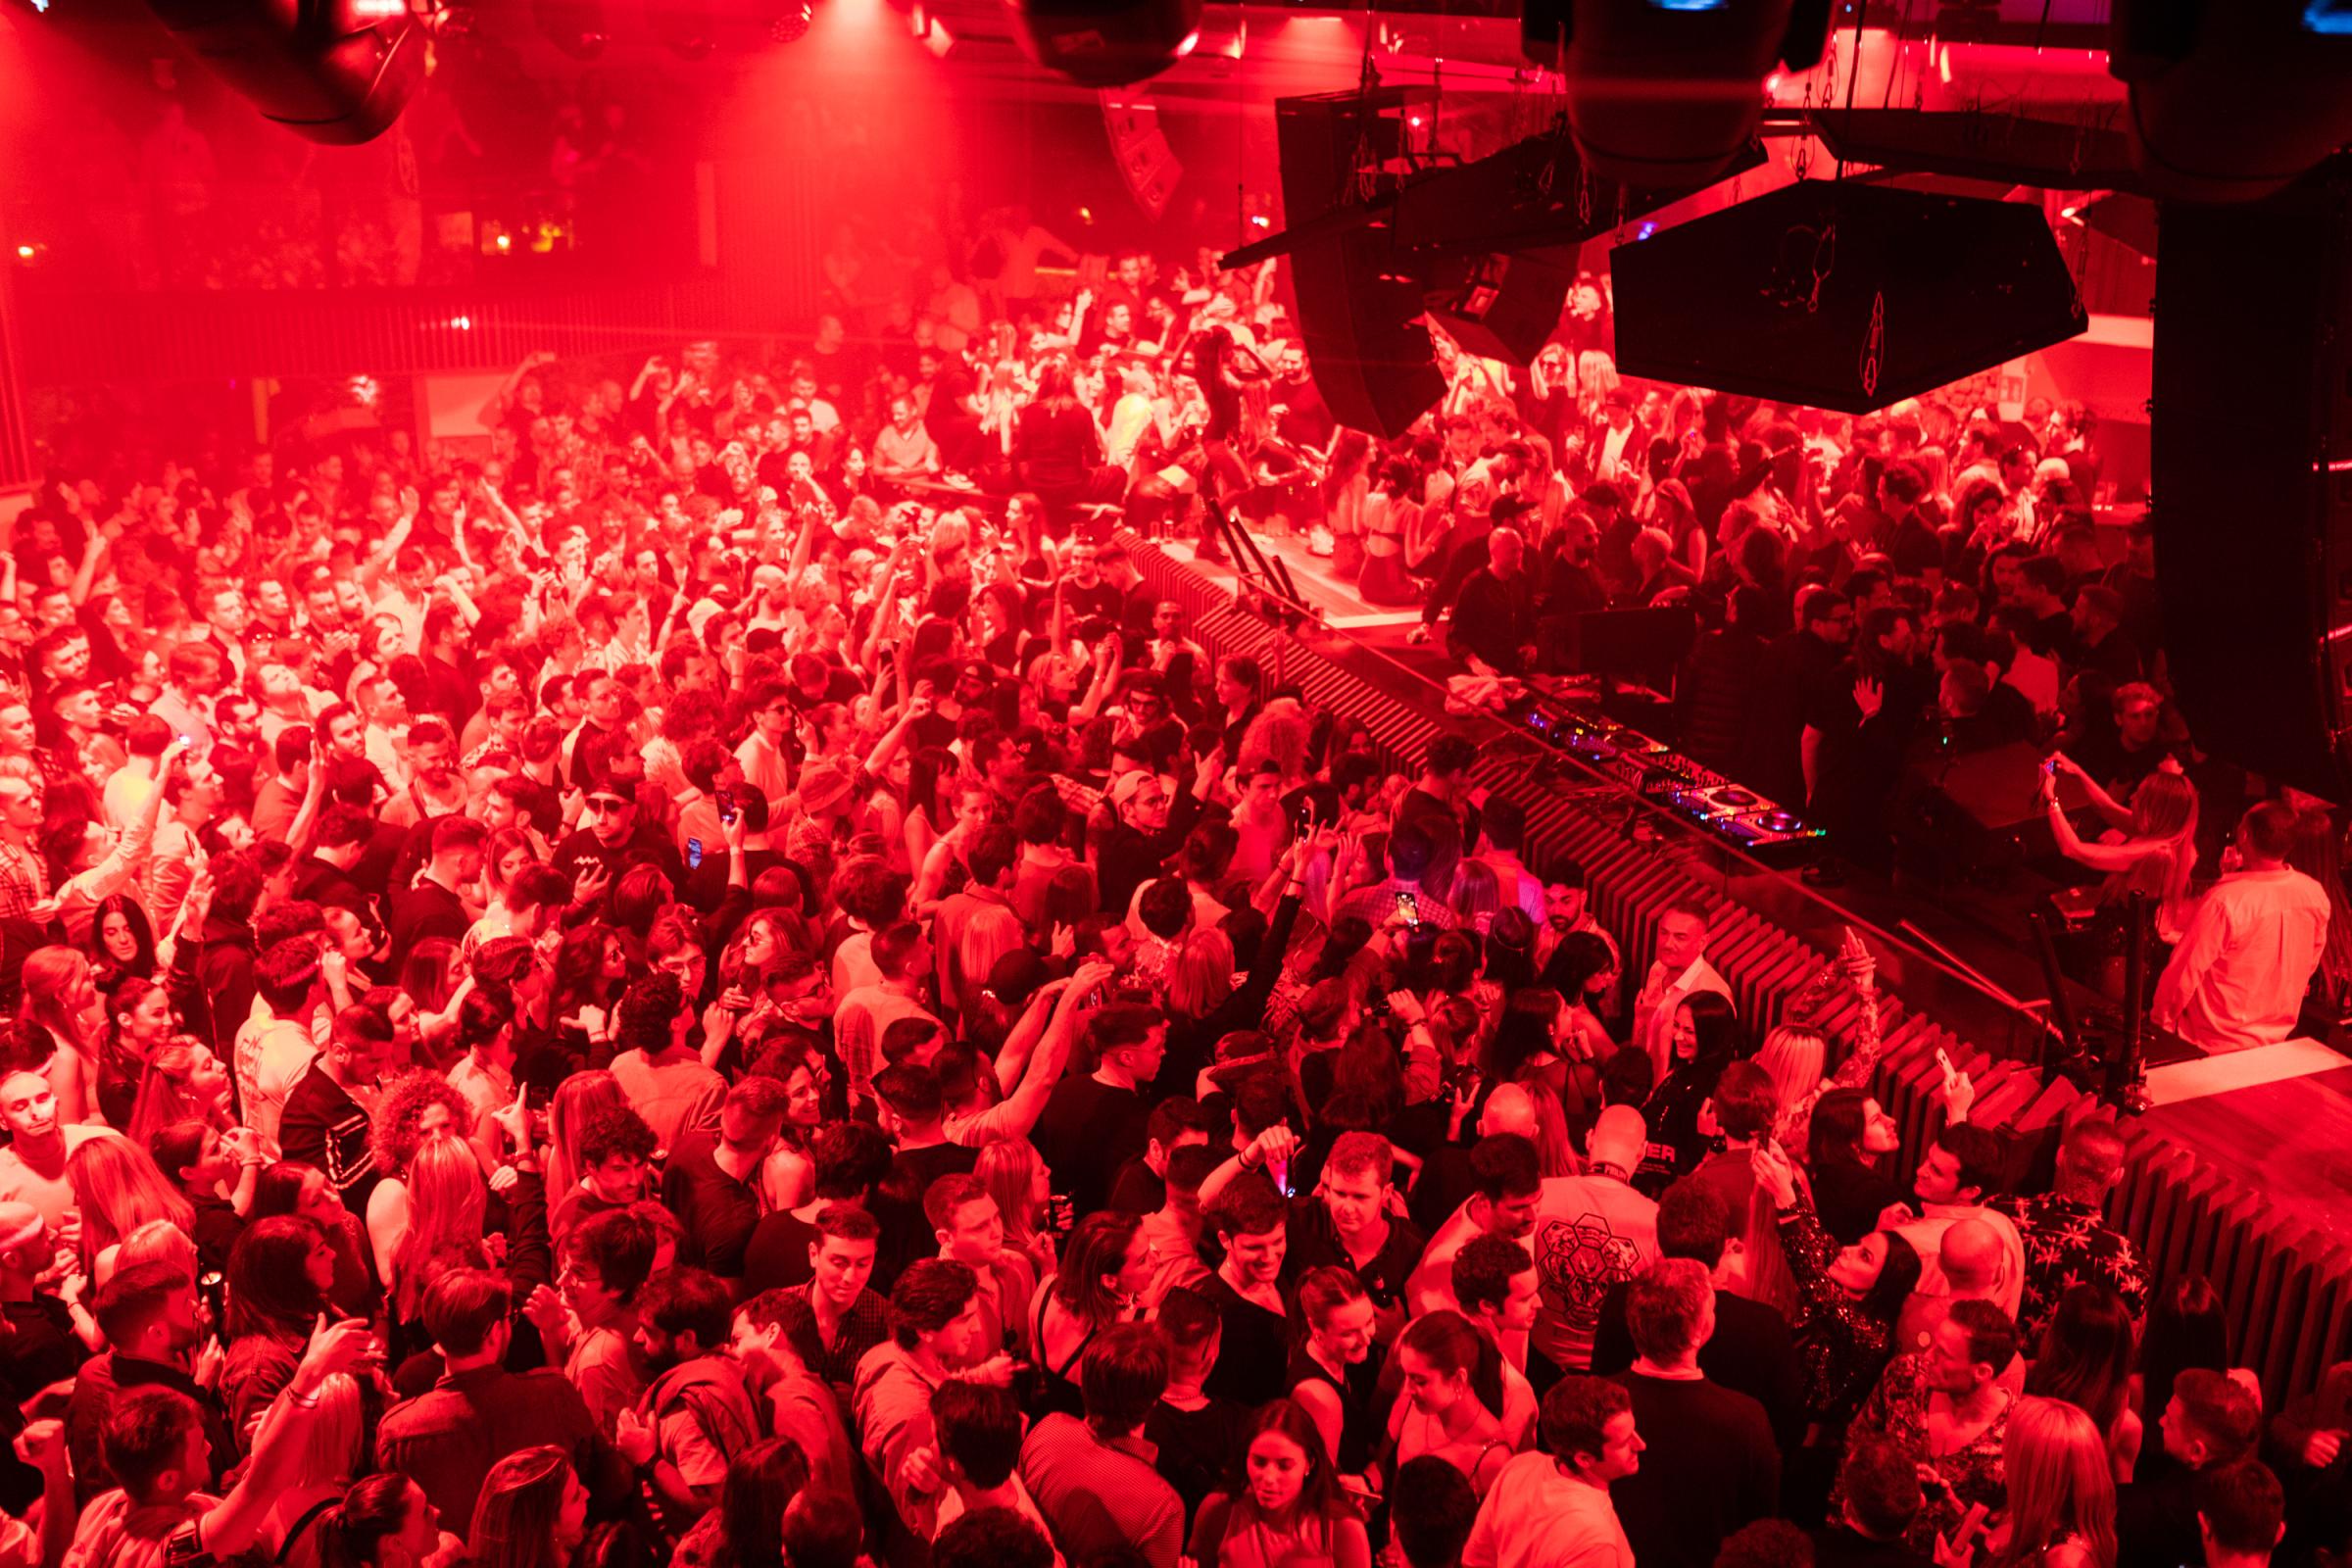 Grand Opening At Pacha Ibiza Heralds A Pre-Pandemic Party Season - Full dance floor at the opening of the Pacha Ibiza...